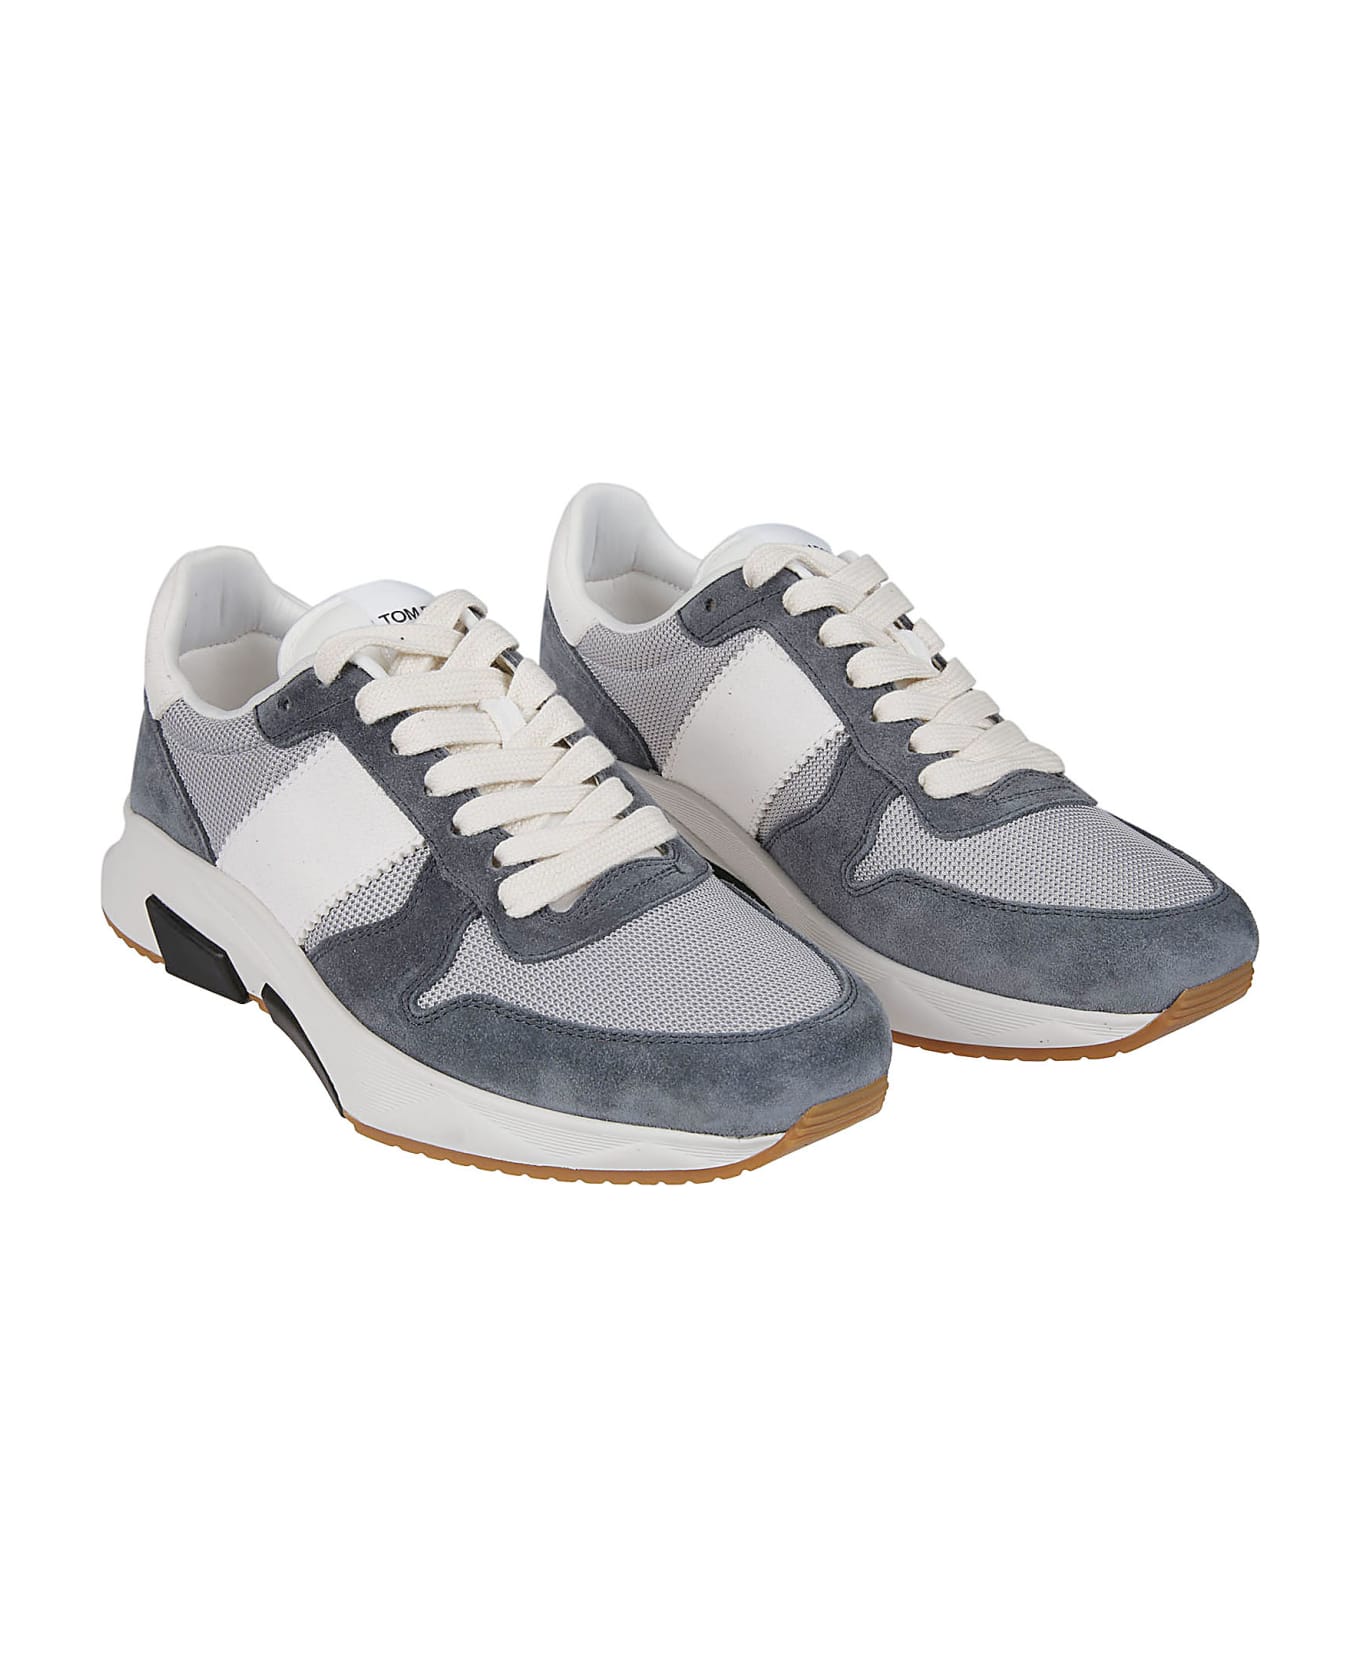 Tom Ford Jago Low Top Sneakers - Silver/petrol Blue/white